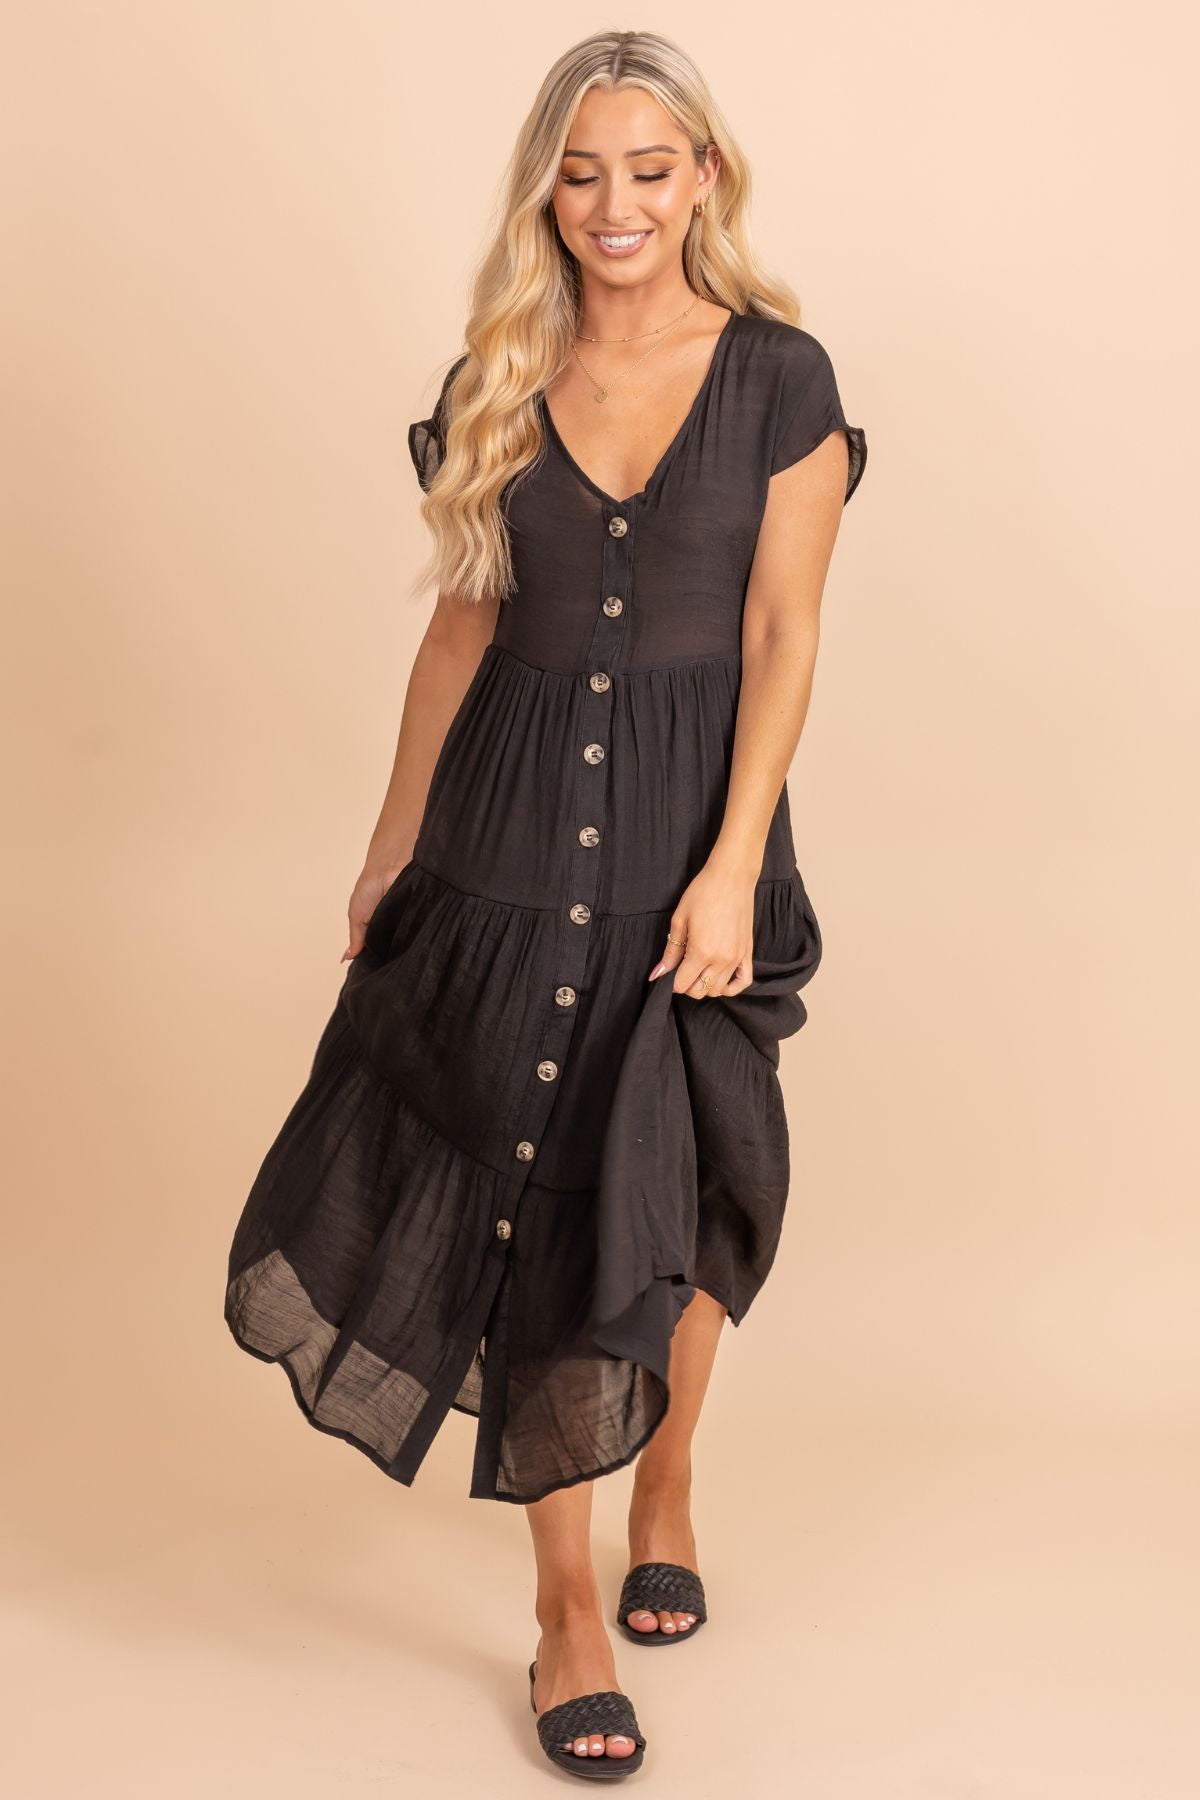 Women's Black Spring and Summer Boutique Midi Dresses for Women